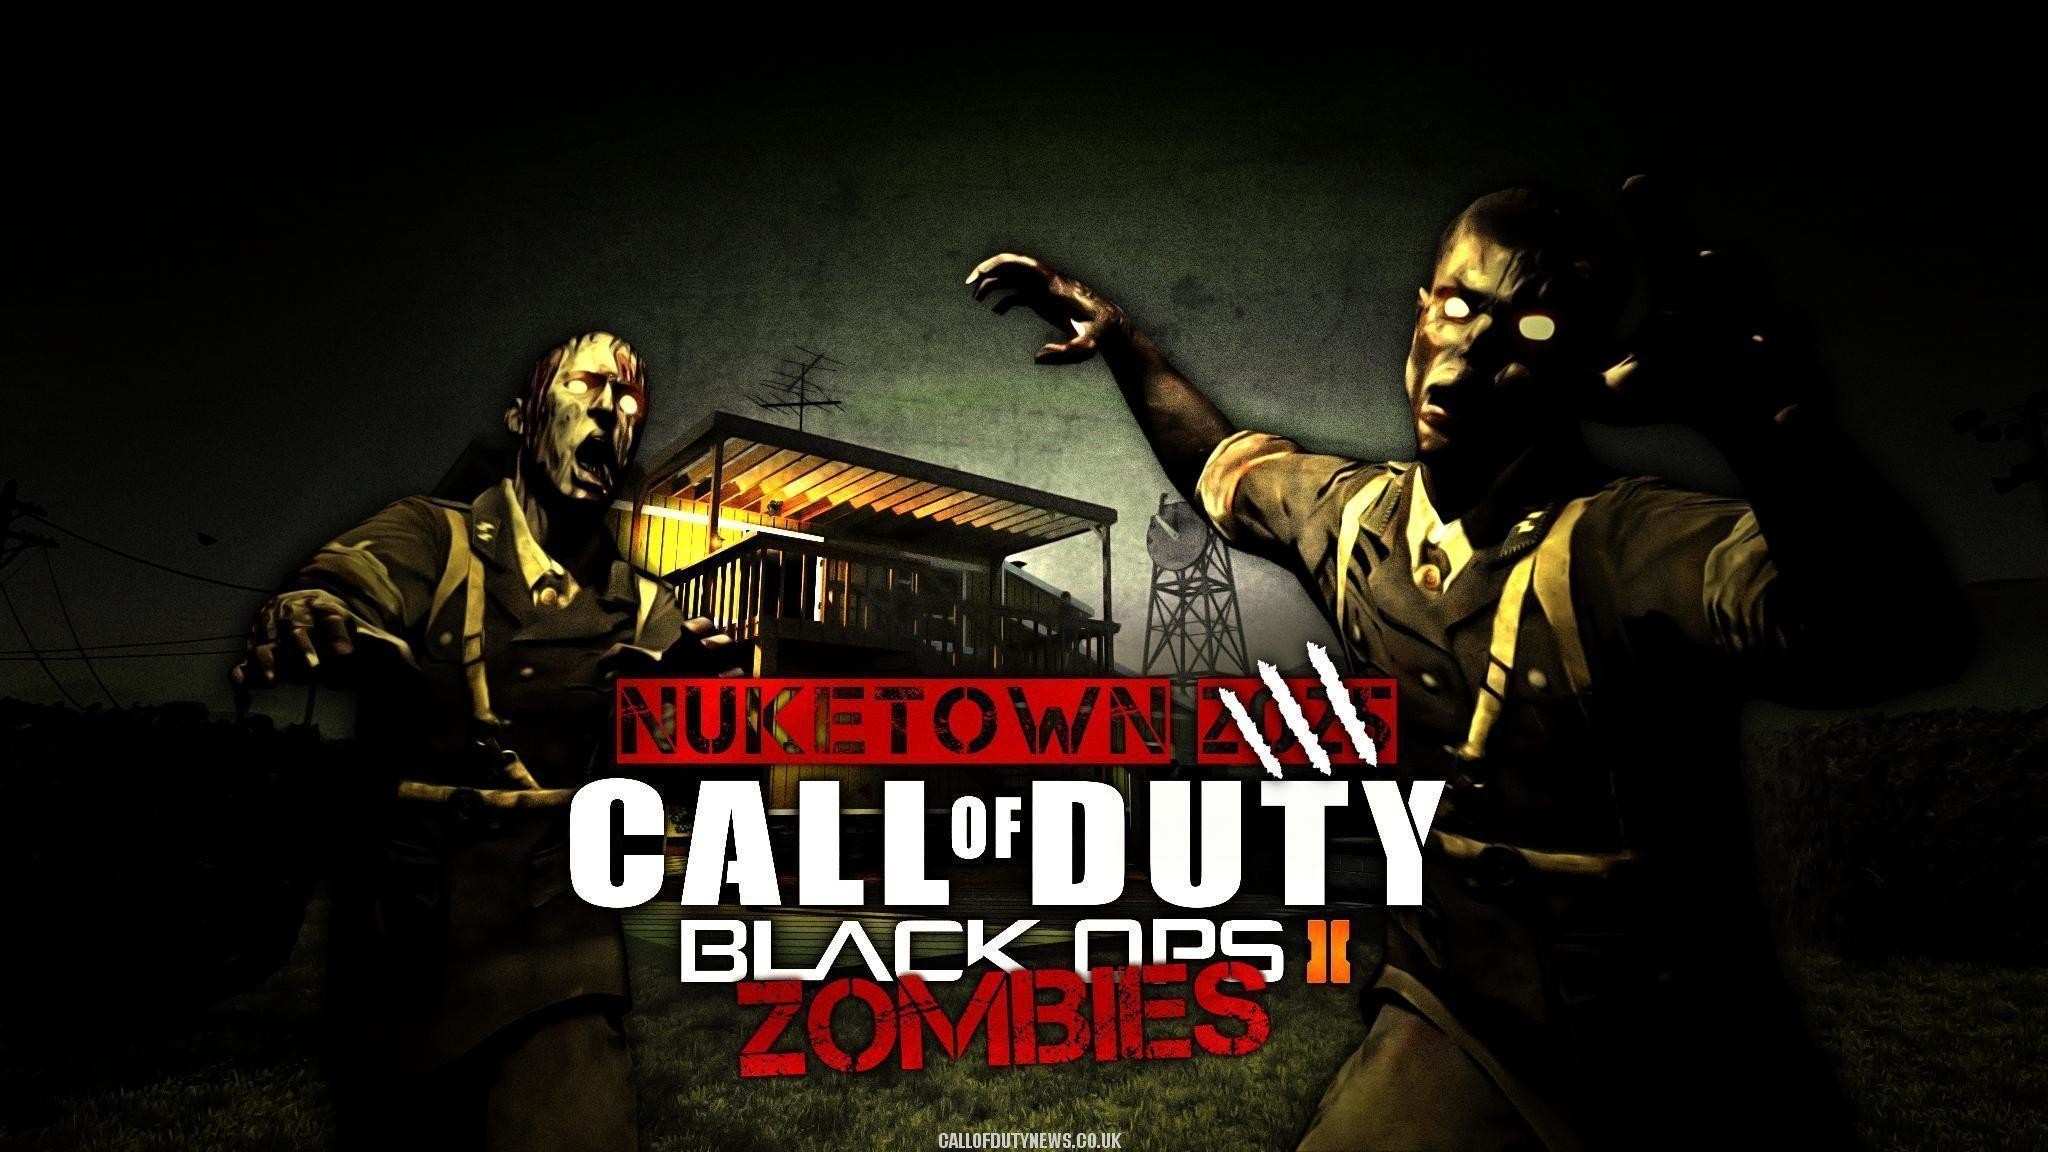 2048x1152 Call of Duty Black Ops 2 Zombie Exclusive HD Wallpapers #